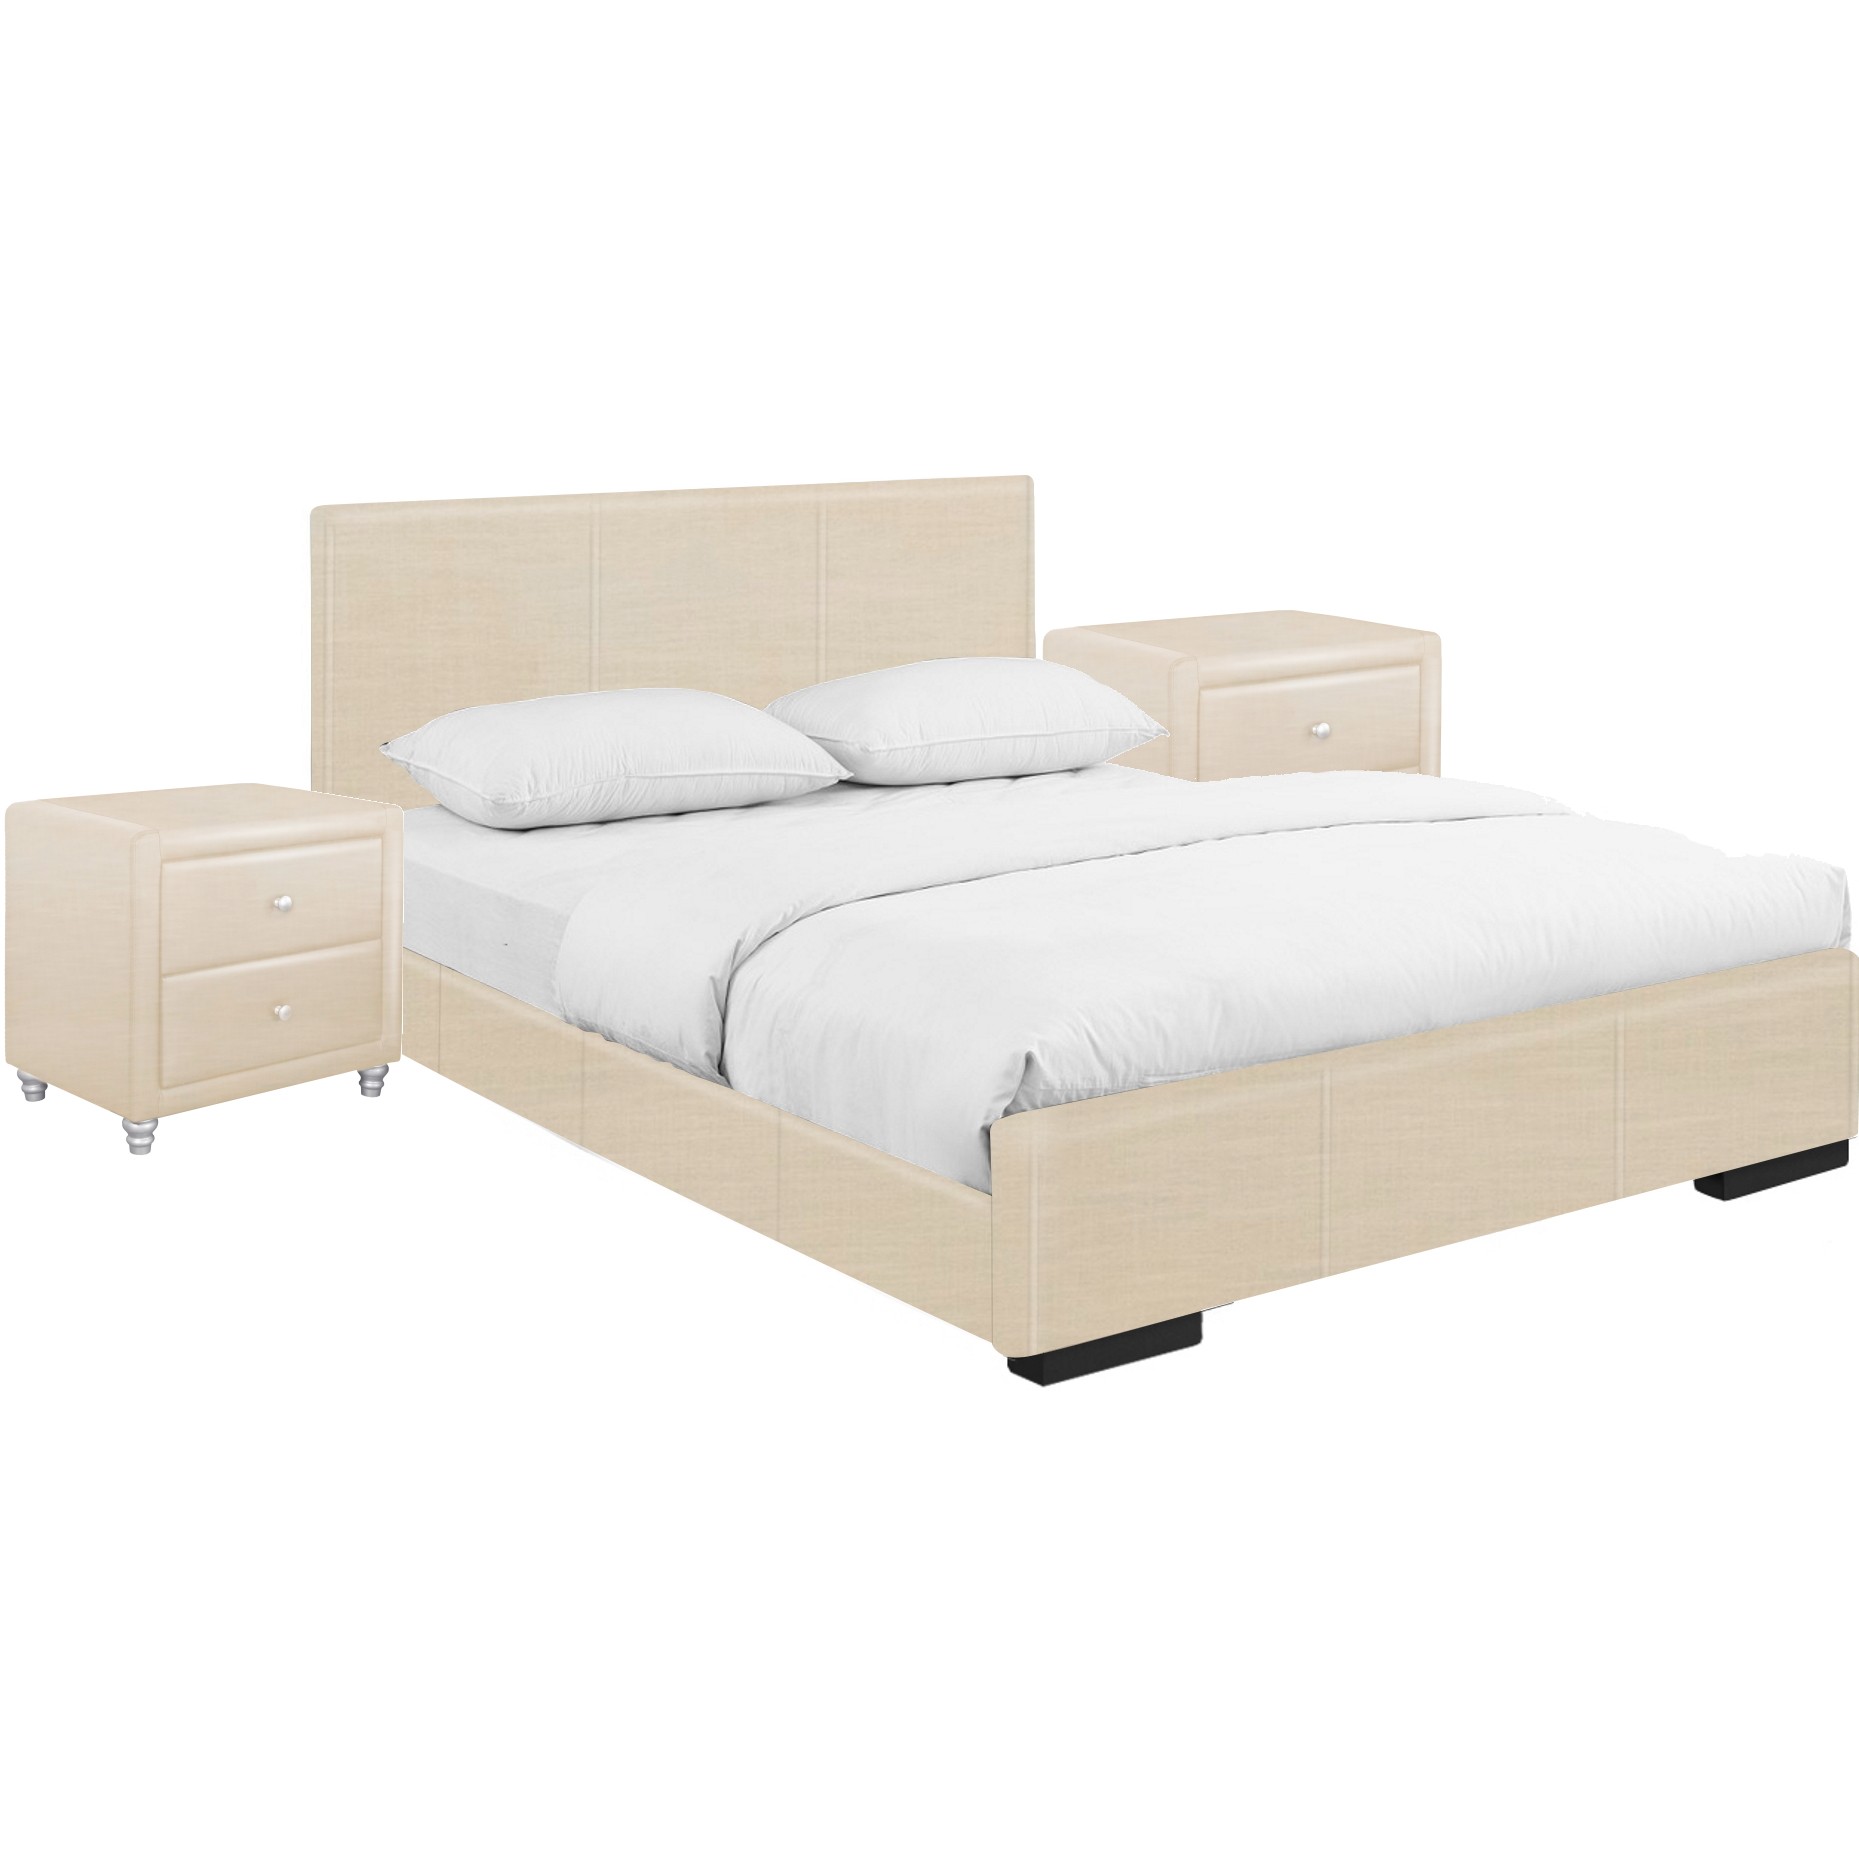 Solid Manufactured Wood Beige Standard Bed Upholstered With Headboard-397067-1